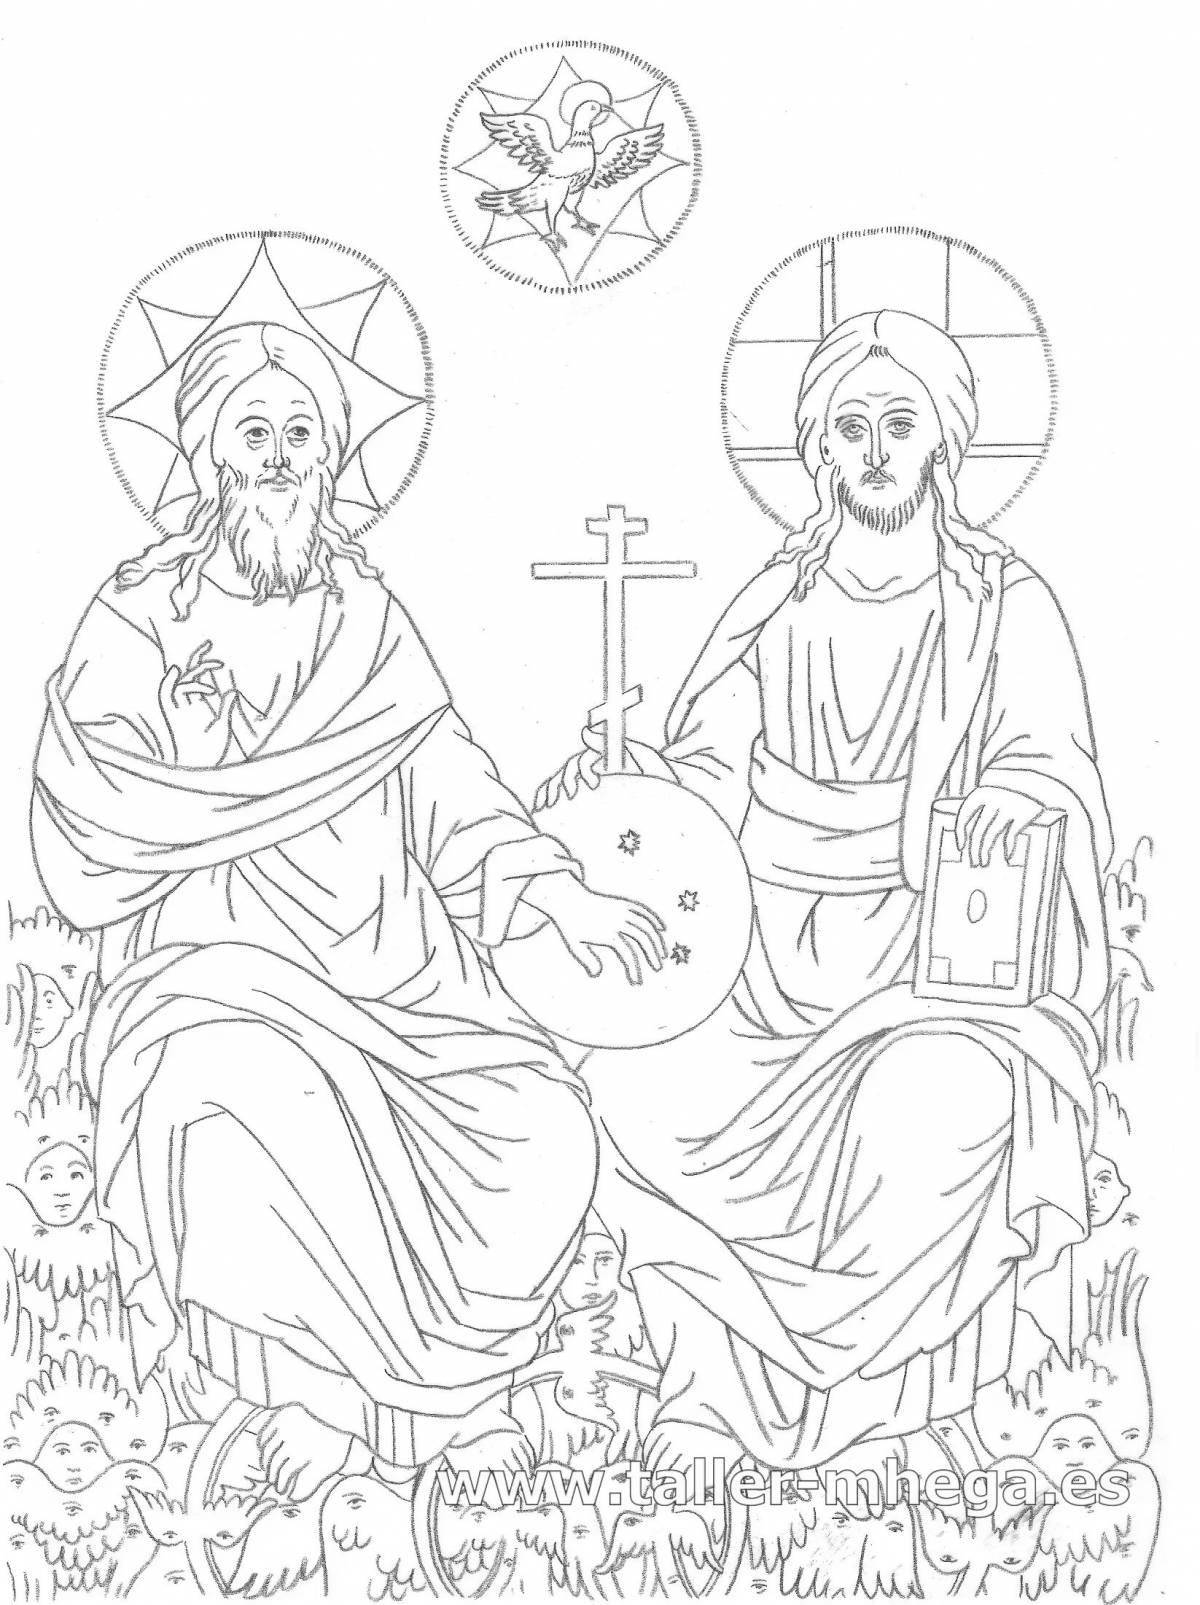 Colorful trinity coloring page